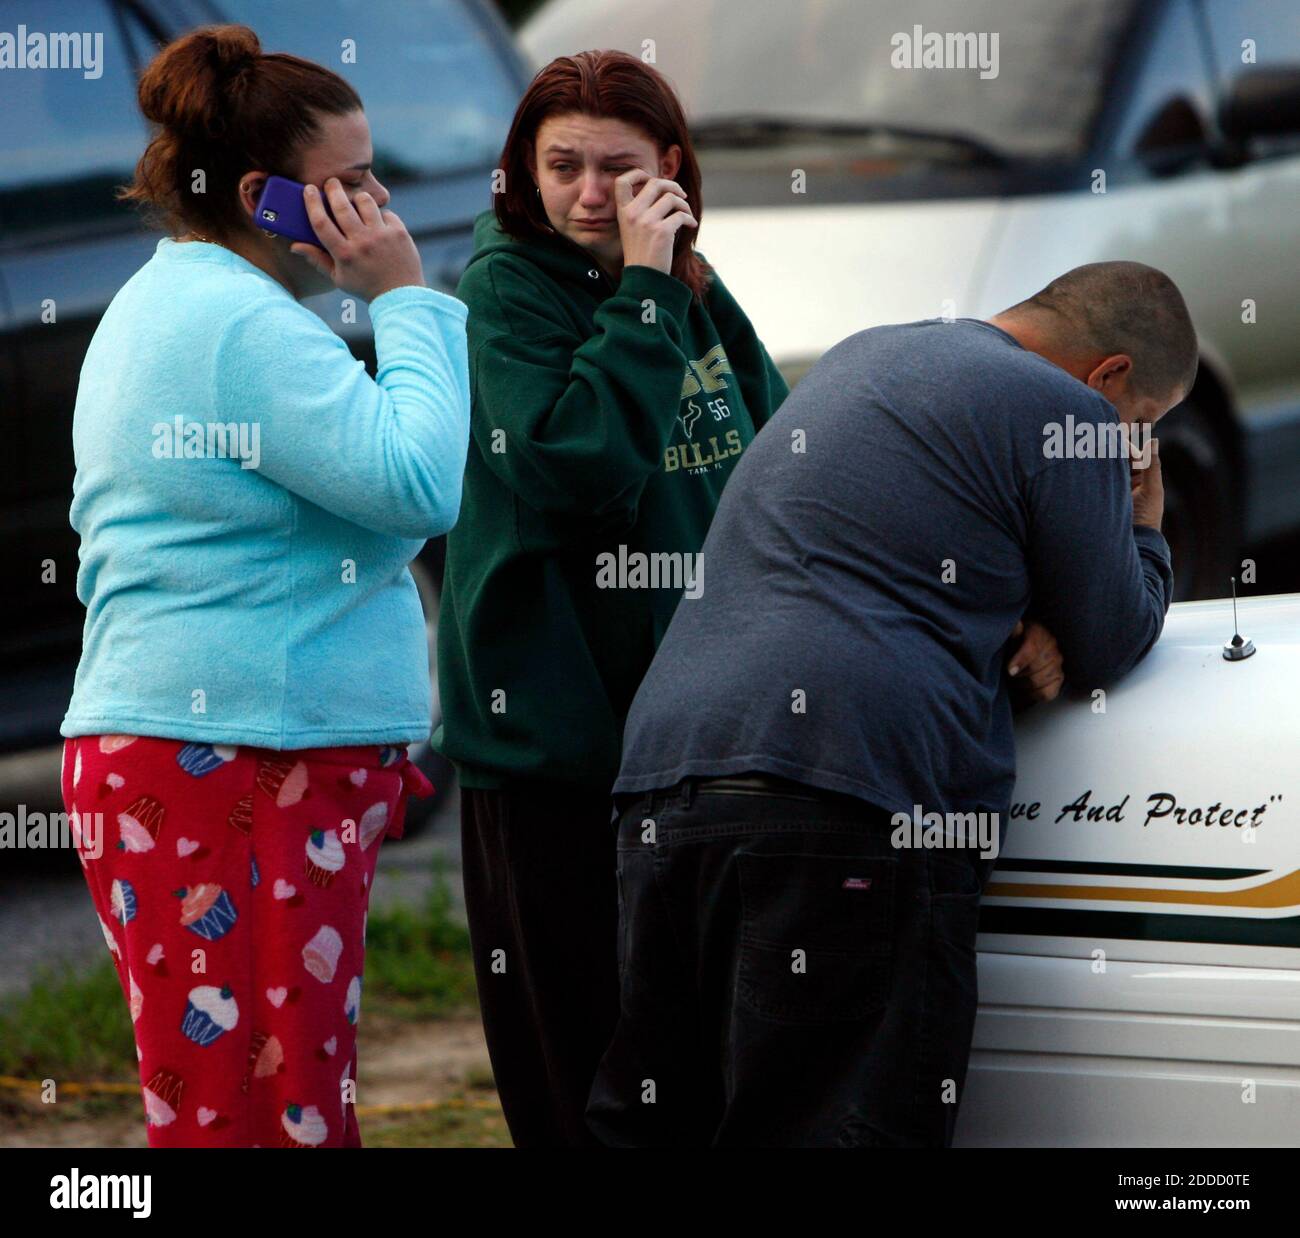 NO FILM, NO VIDEO, NO TV, NO DOCUMENTARY - Jeremy Bush, right, waits at the scene of his home, in Seffner, Florida, Friday, March 1, 2013. A Florida man was feared dead after a sinkhole suddenly opened up under the bedroom of his suburban Tampa home and swallowed him, police and fire officials said. Rescuers responded to a 911 call late on Thursday after the family of Jeff Bush, 36, reported hearing a loud crash in the house and rushed to his bedroom. Photo by Skip O'Rourke/Tampa Bay Times/MCT/ABACAPRESS.COM Stock Photo